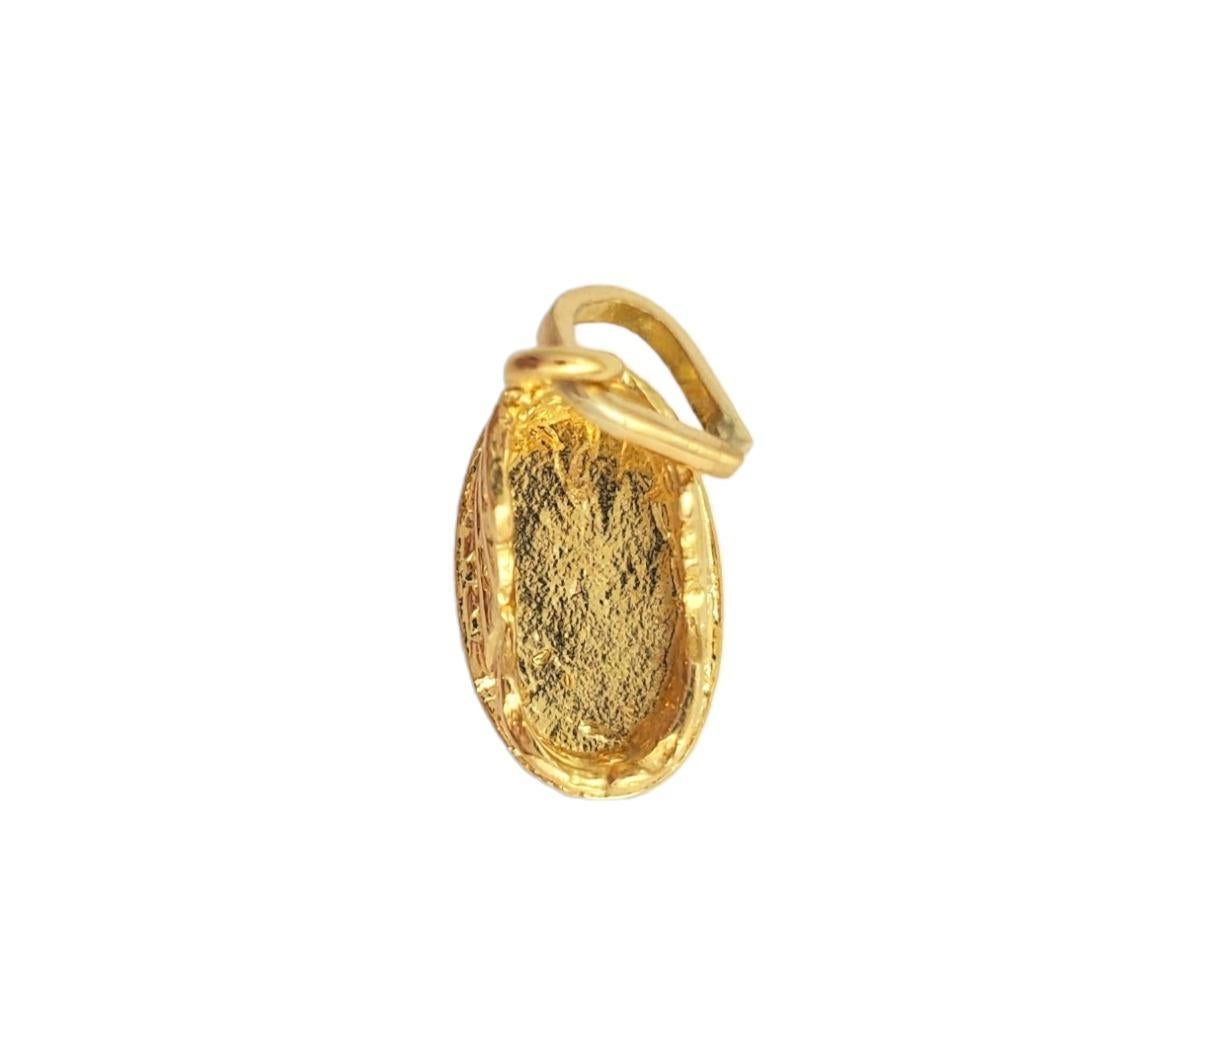 18K Yellow Gold Rome Colosseum Charm #16003 For Sale 2